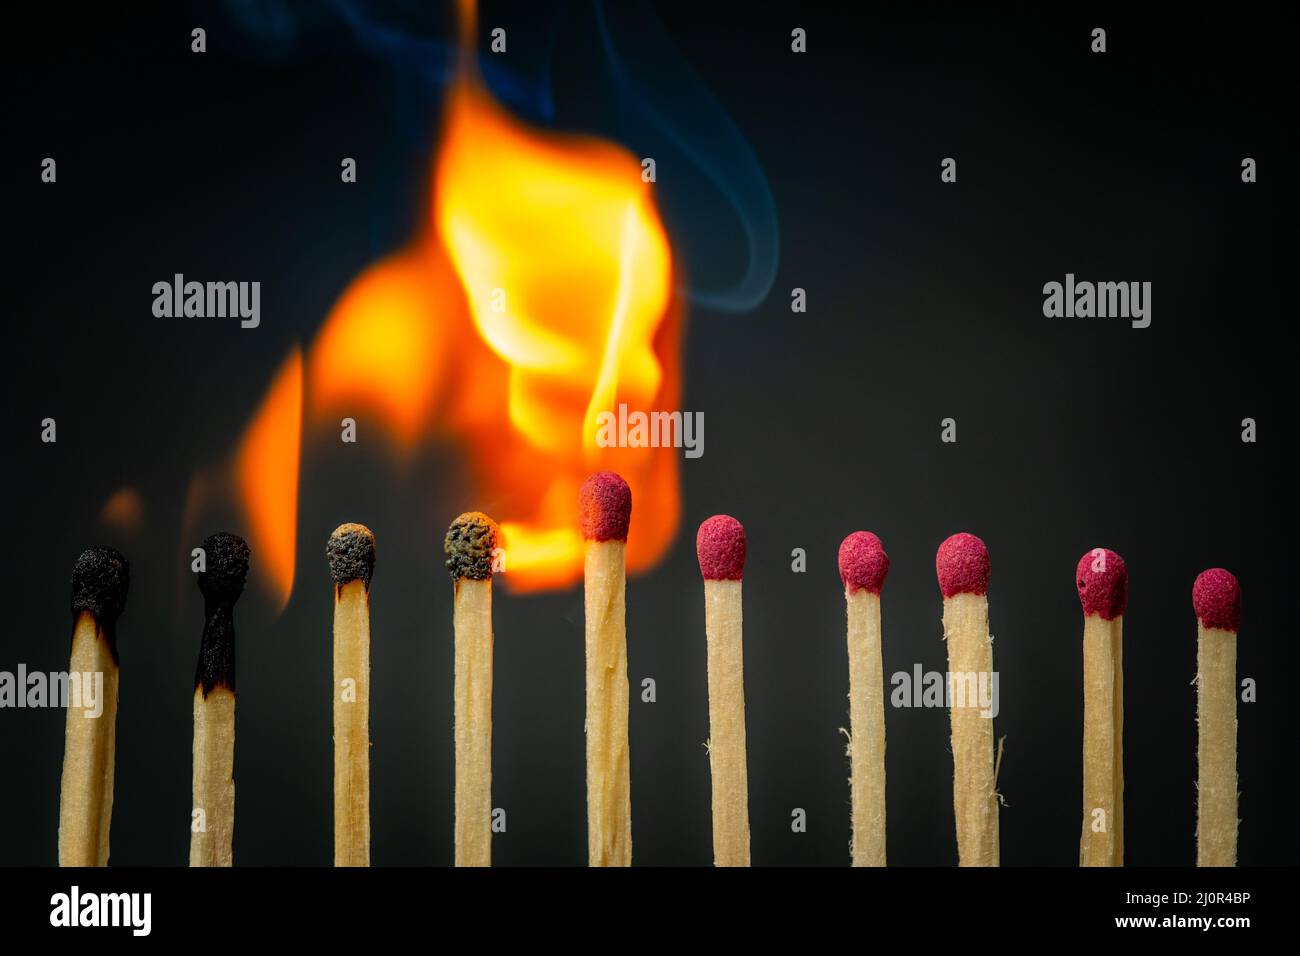 The stages of match burning on a dark background Stock Photo